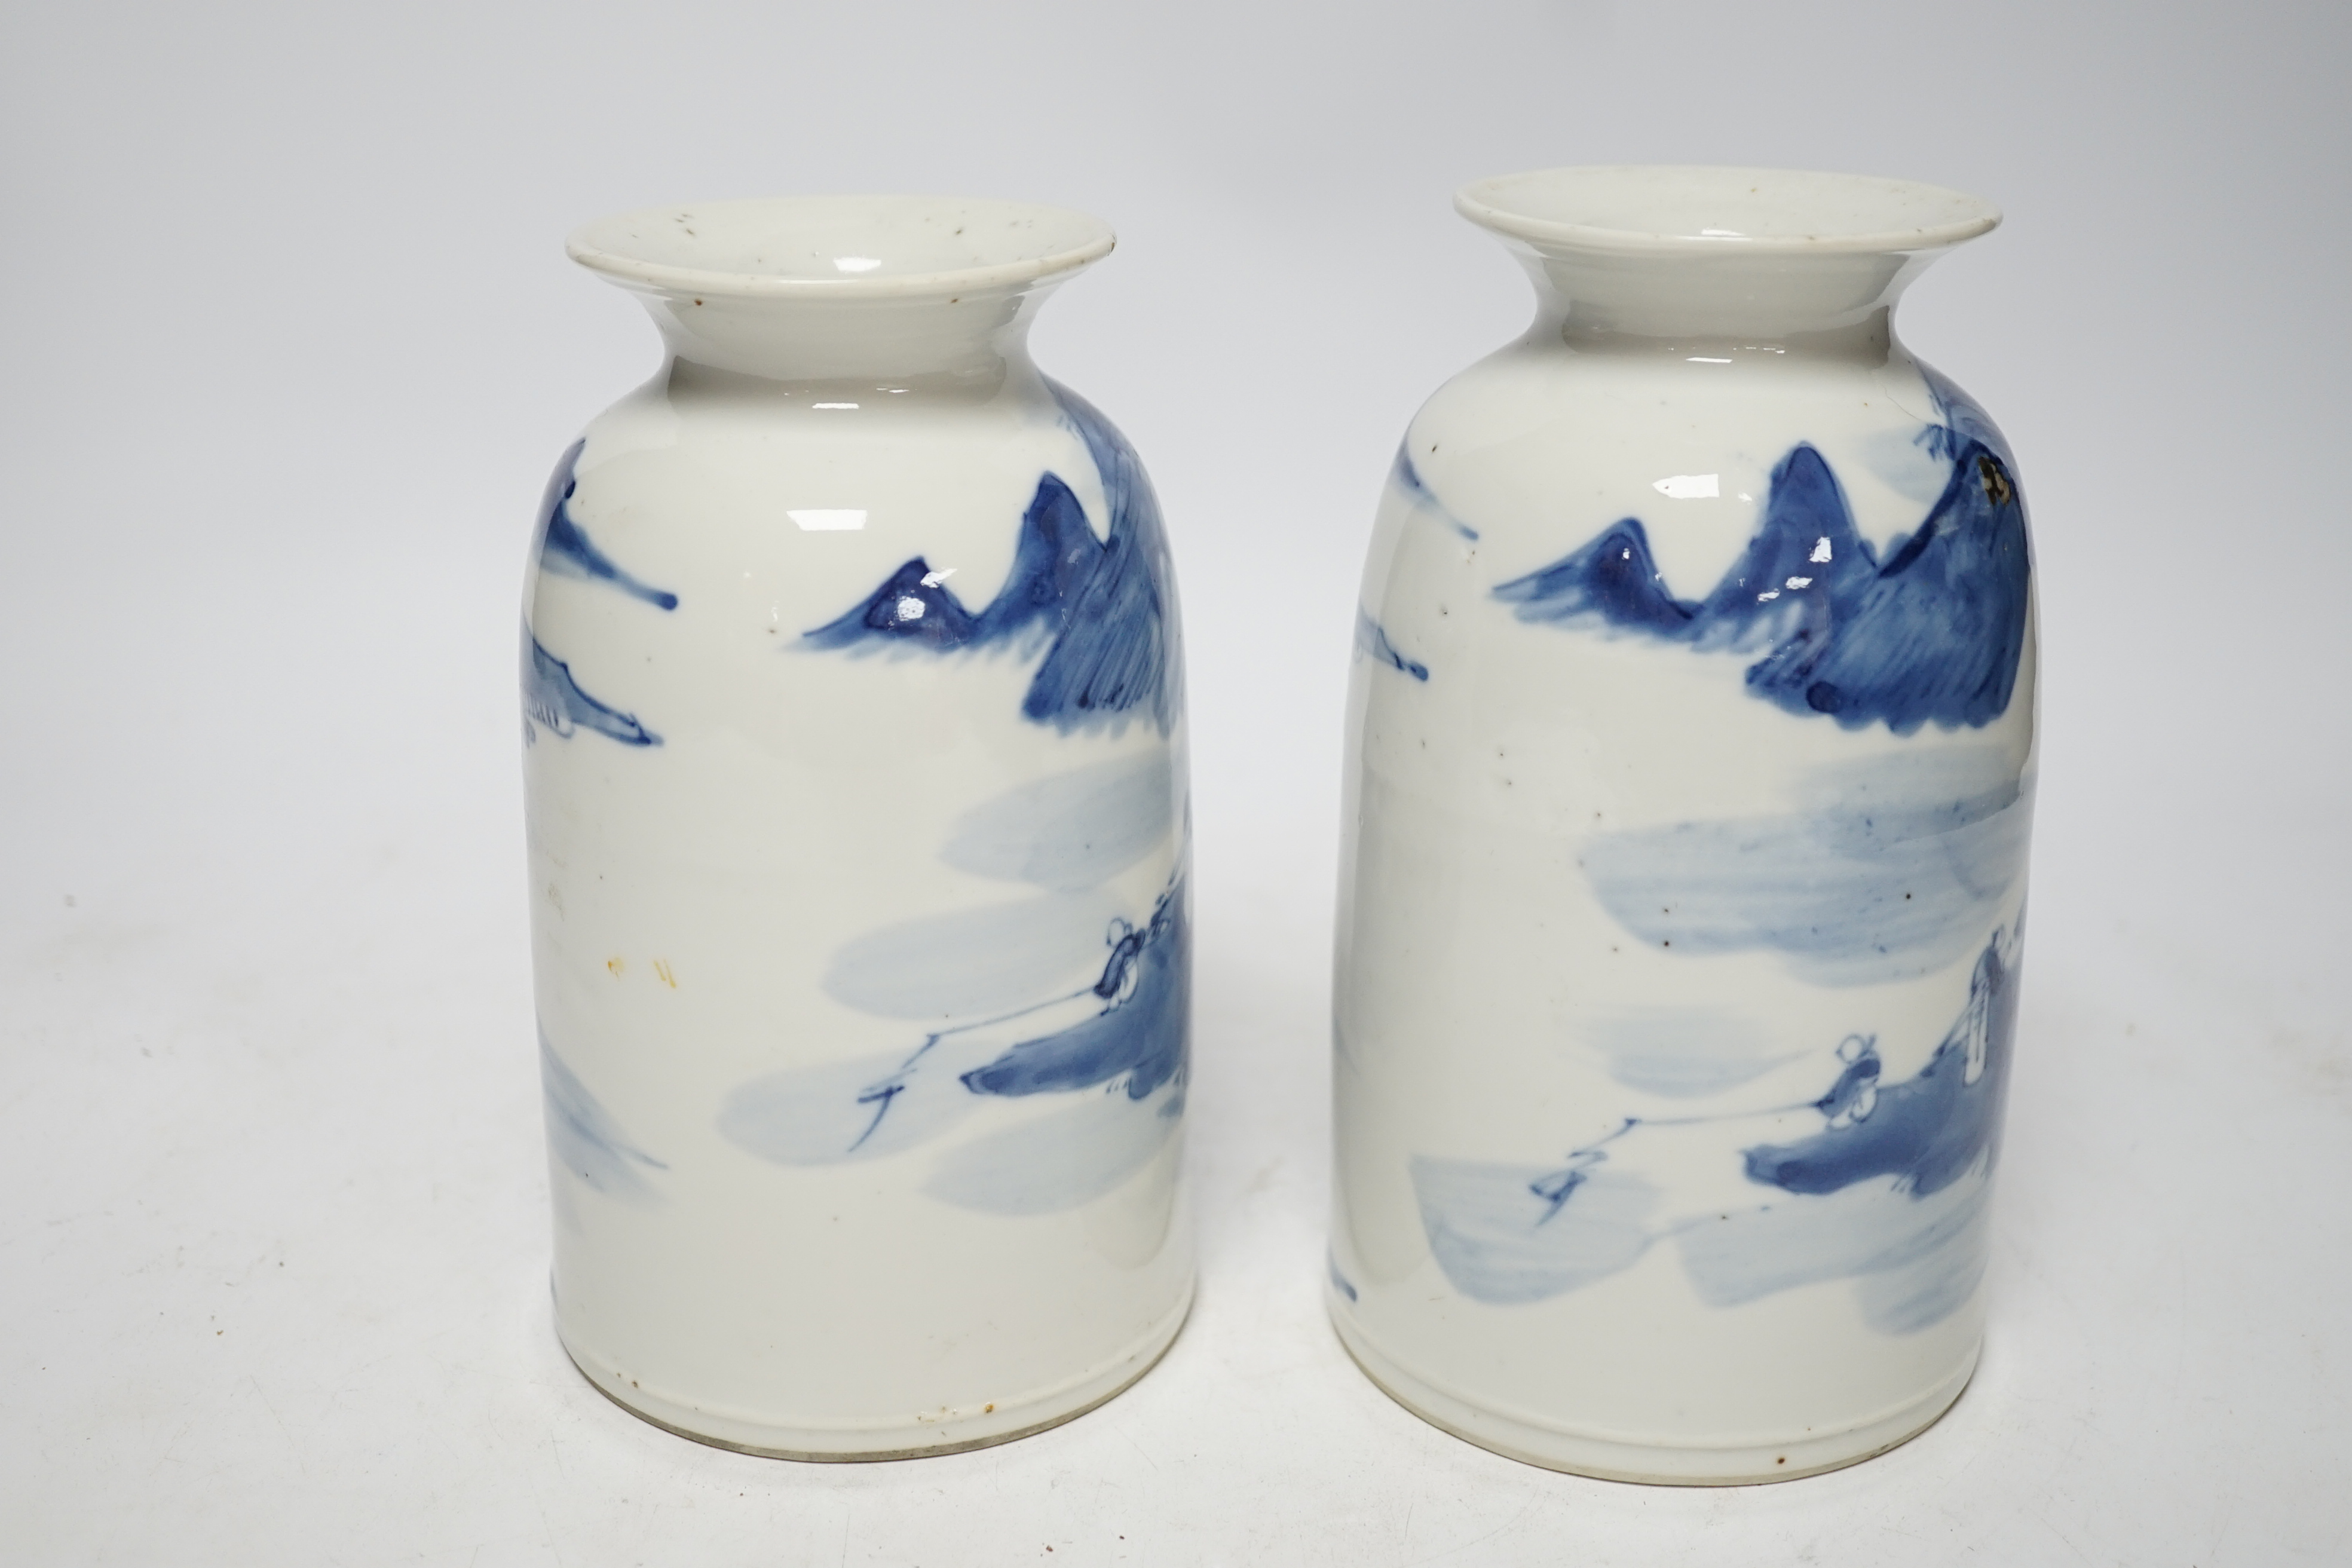 A pair of Chinese blue and white jars, 19th century, 19cm high